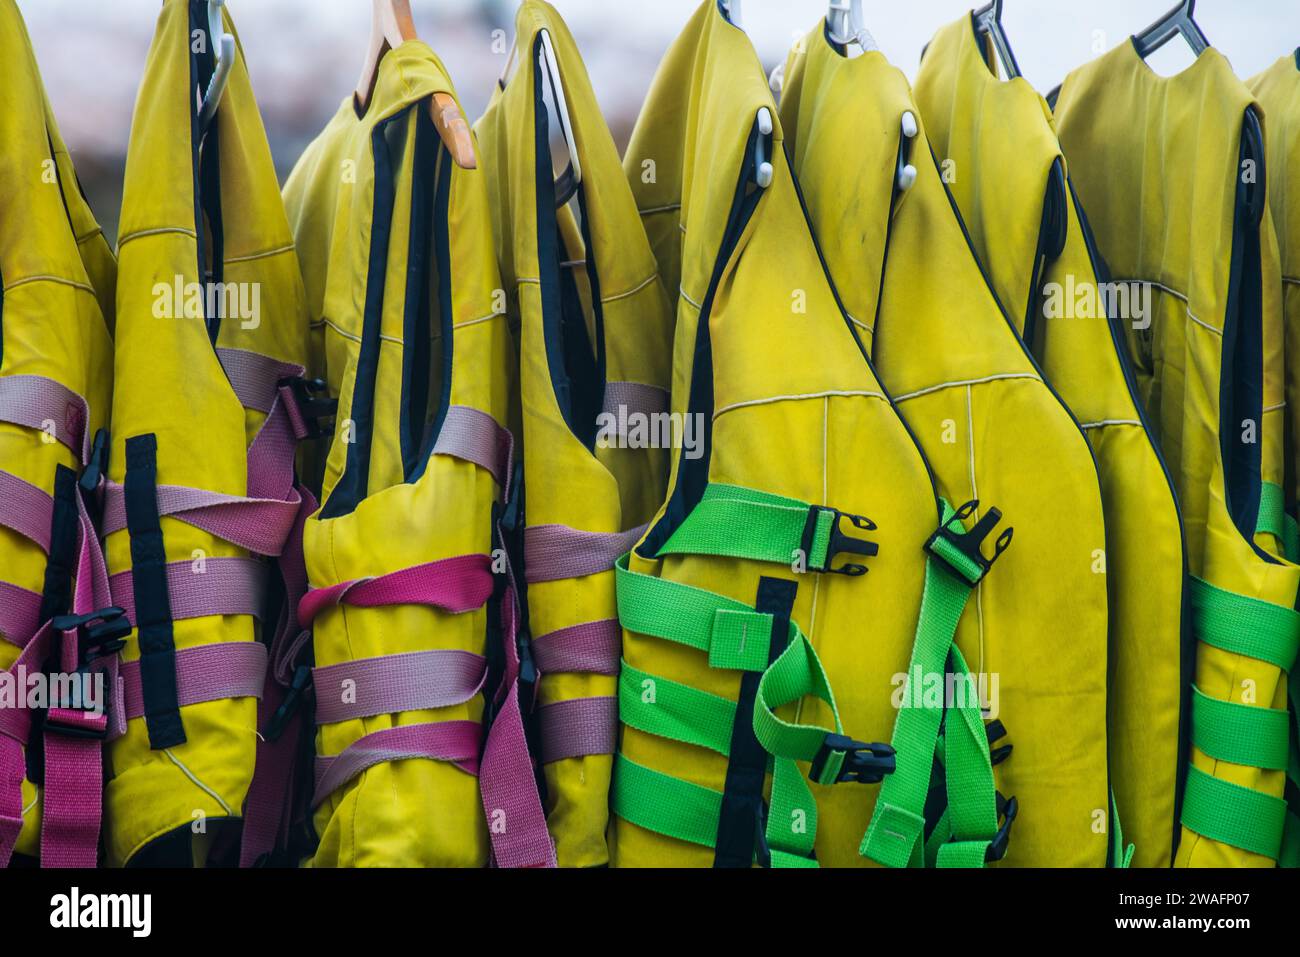 A row of yellow high visibility life jackets hung on coat hangers Stock Photo